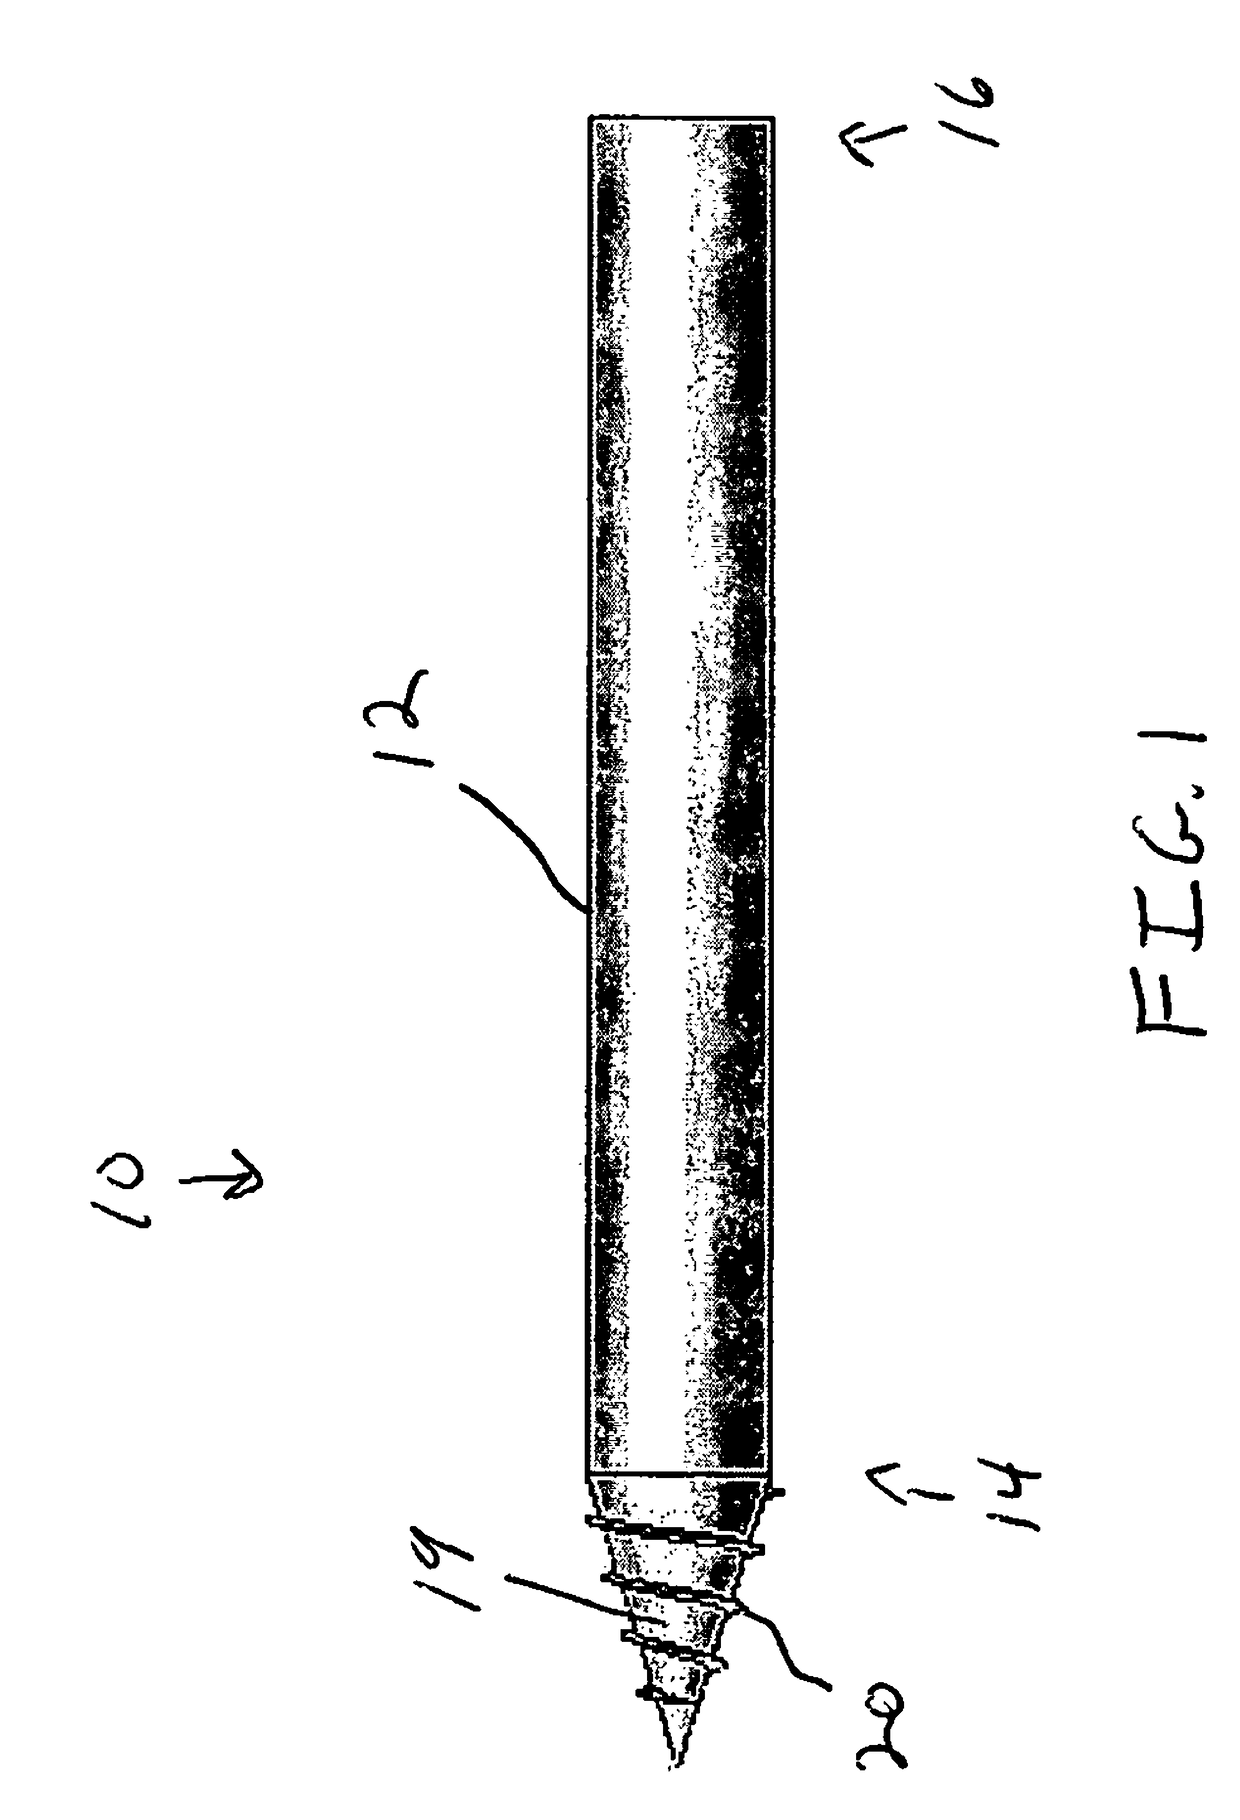 Brachytherapy method and applicator for treatment of metastatic lesions in a load bearing region